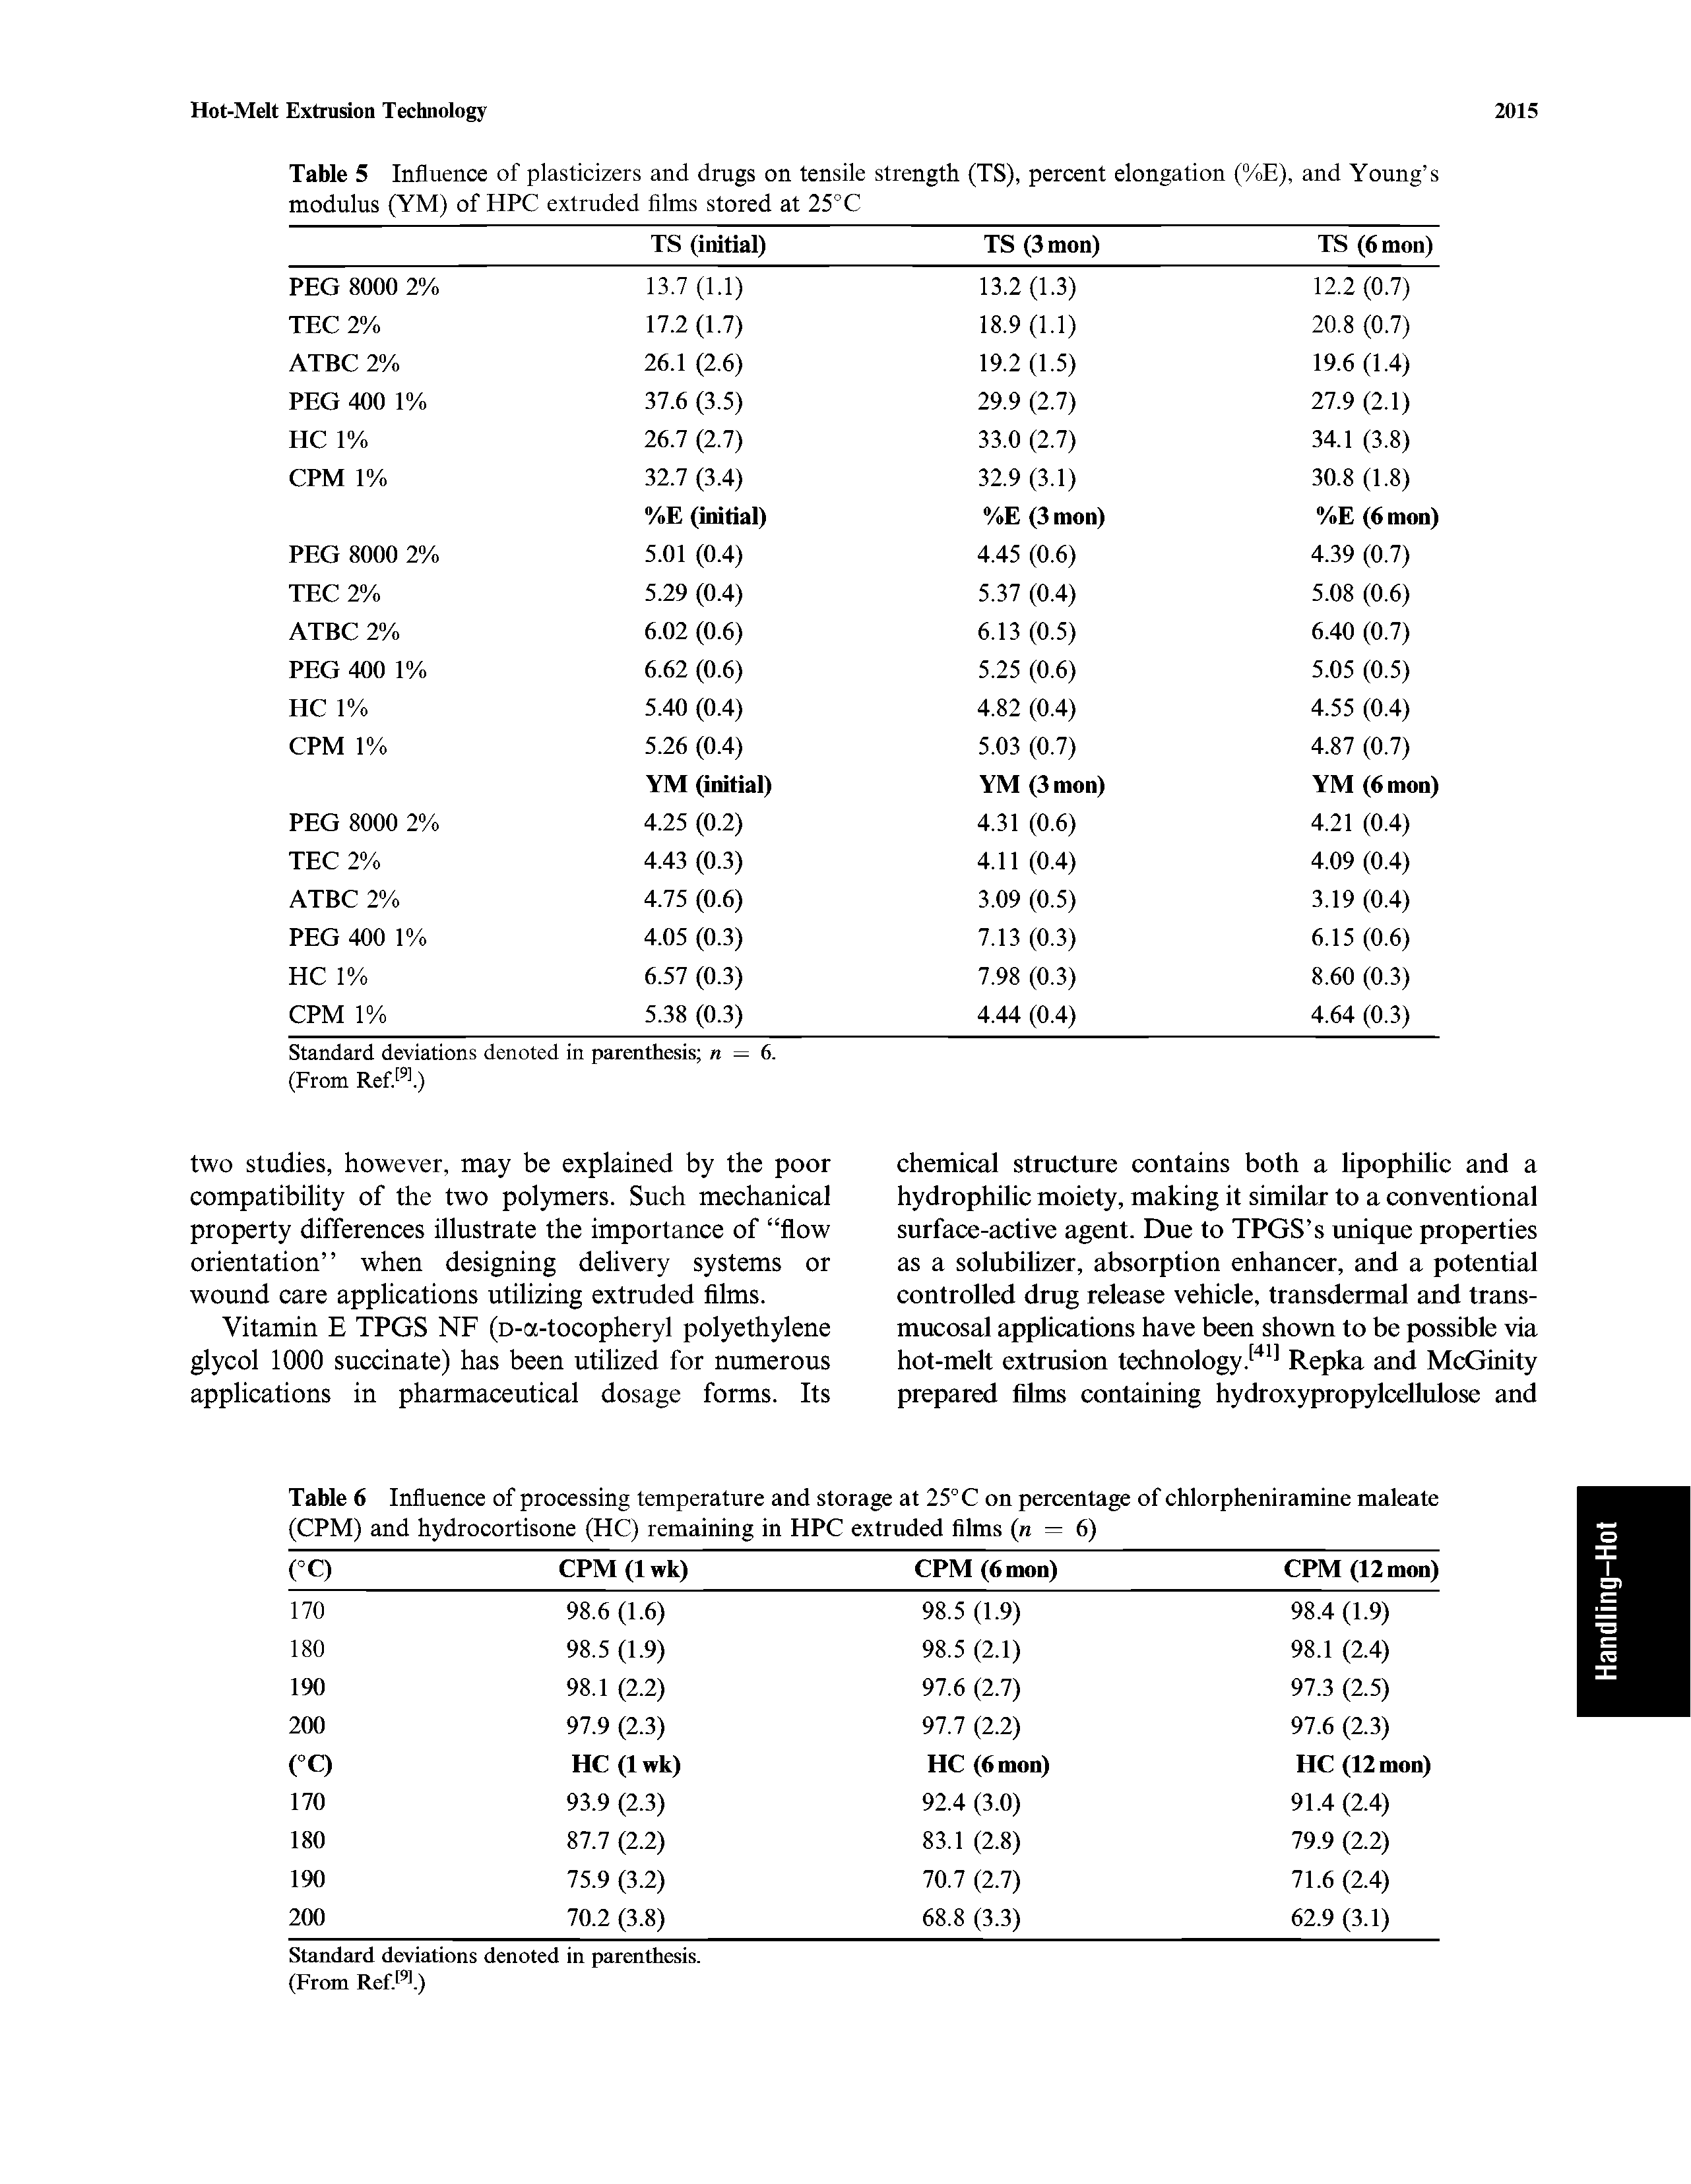 Table 5 Influence of plasticizers and drugs on tensile strength (TS), percent elongation (%E), and Young s modulus (YM) of HPC extruded films stored at 25° C...